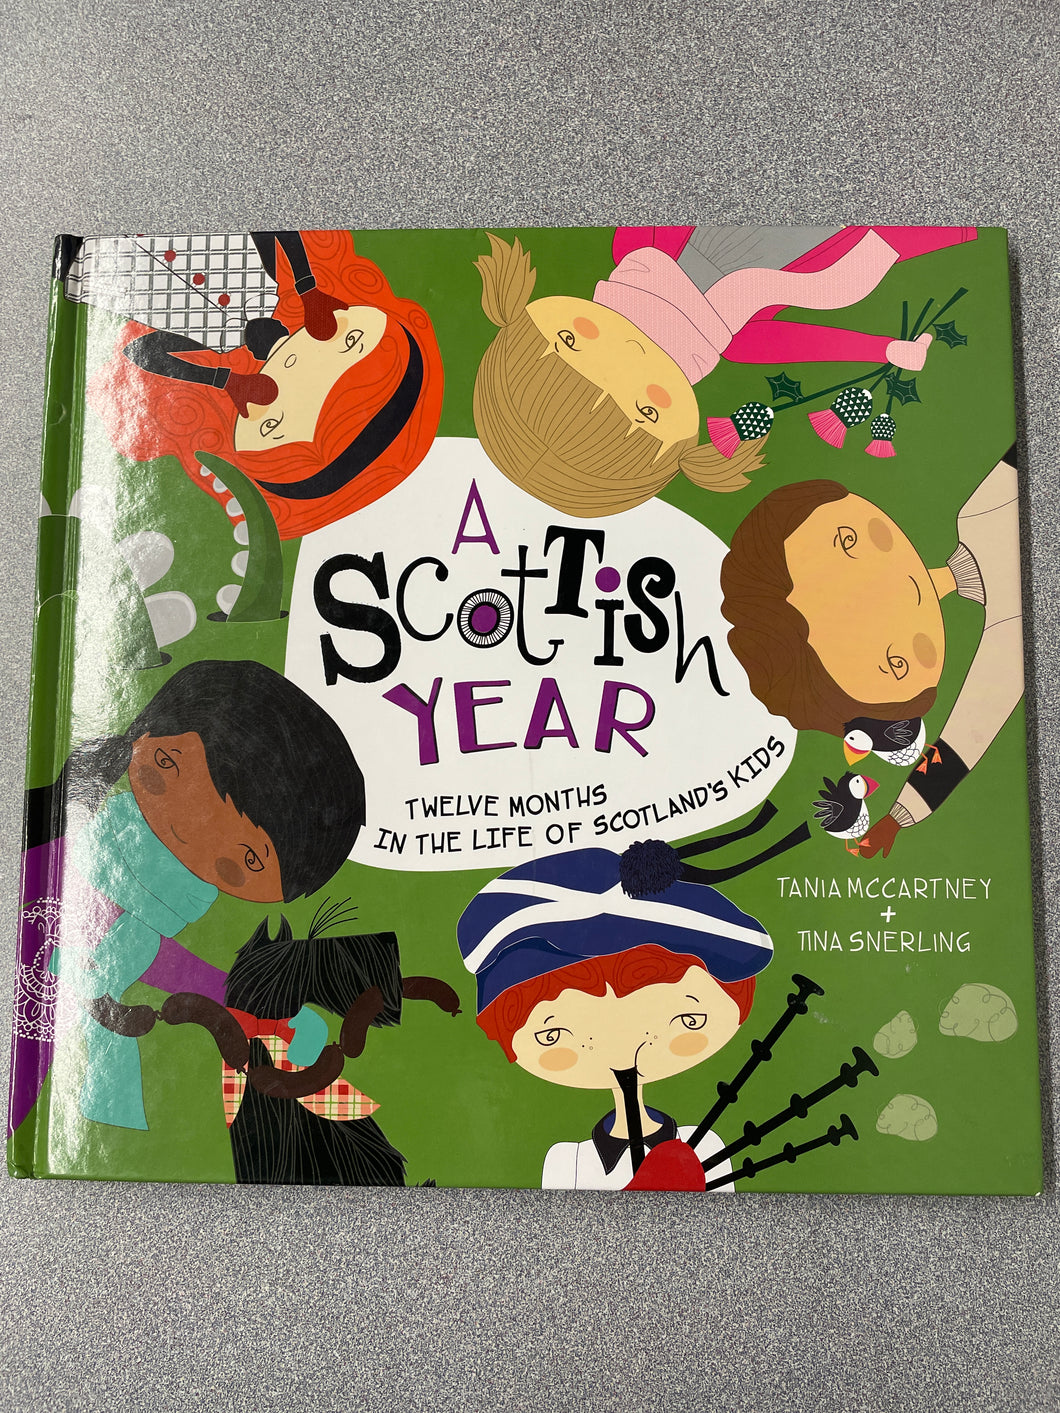 McCartney, Tania and Tina Snerling, A Scottish Year: Twelve Months in the Life of Scotland's Kids [2015] CP 2/24